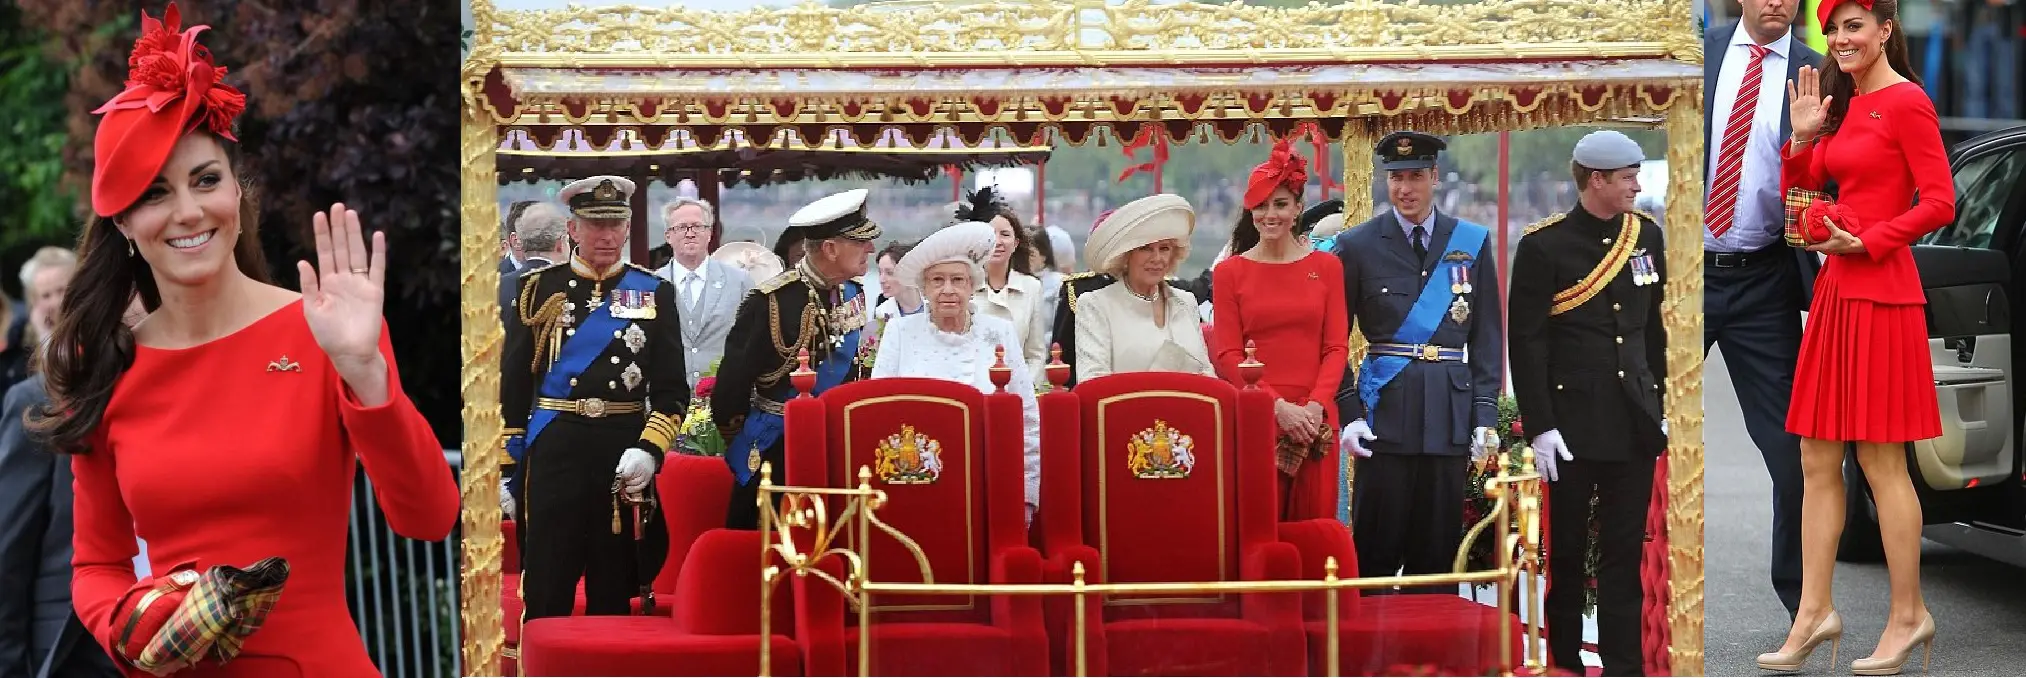 The Duchess of Cambridge wore red Alexander McQueen dress at Diamond Jubilee Boat Procession in 2012